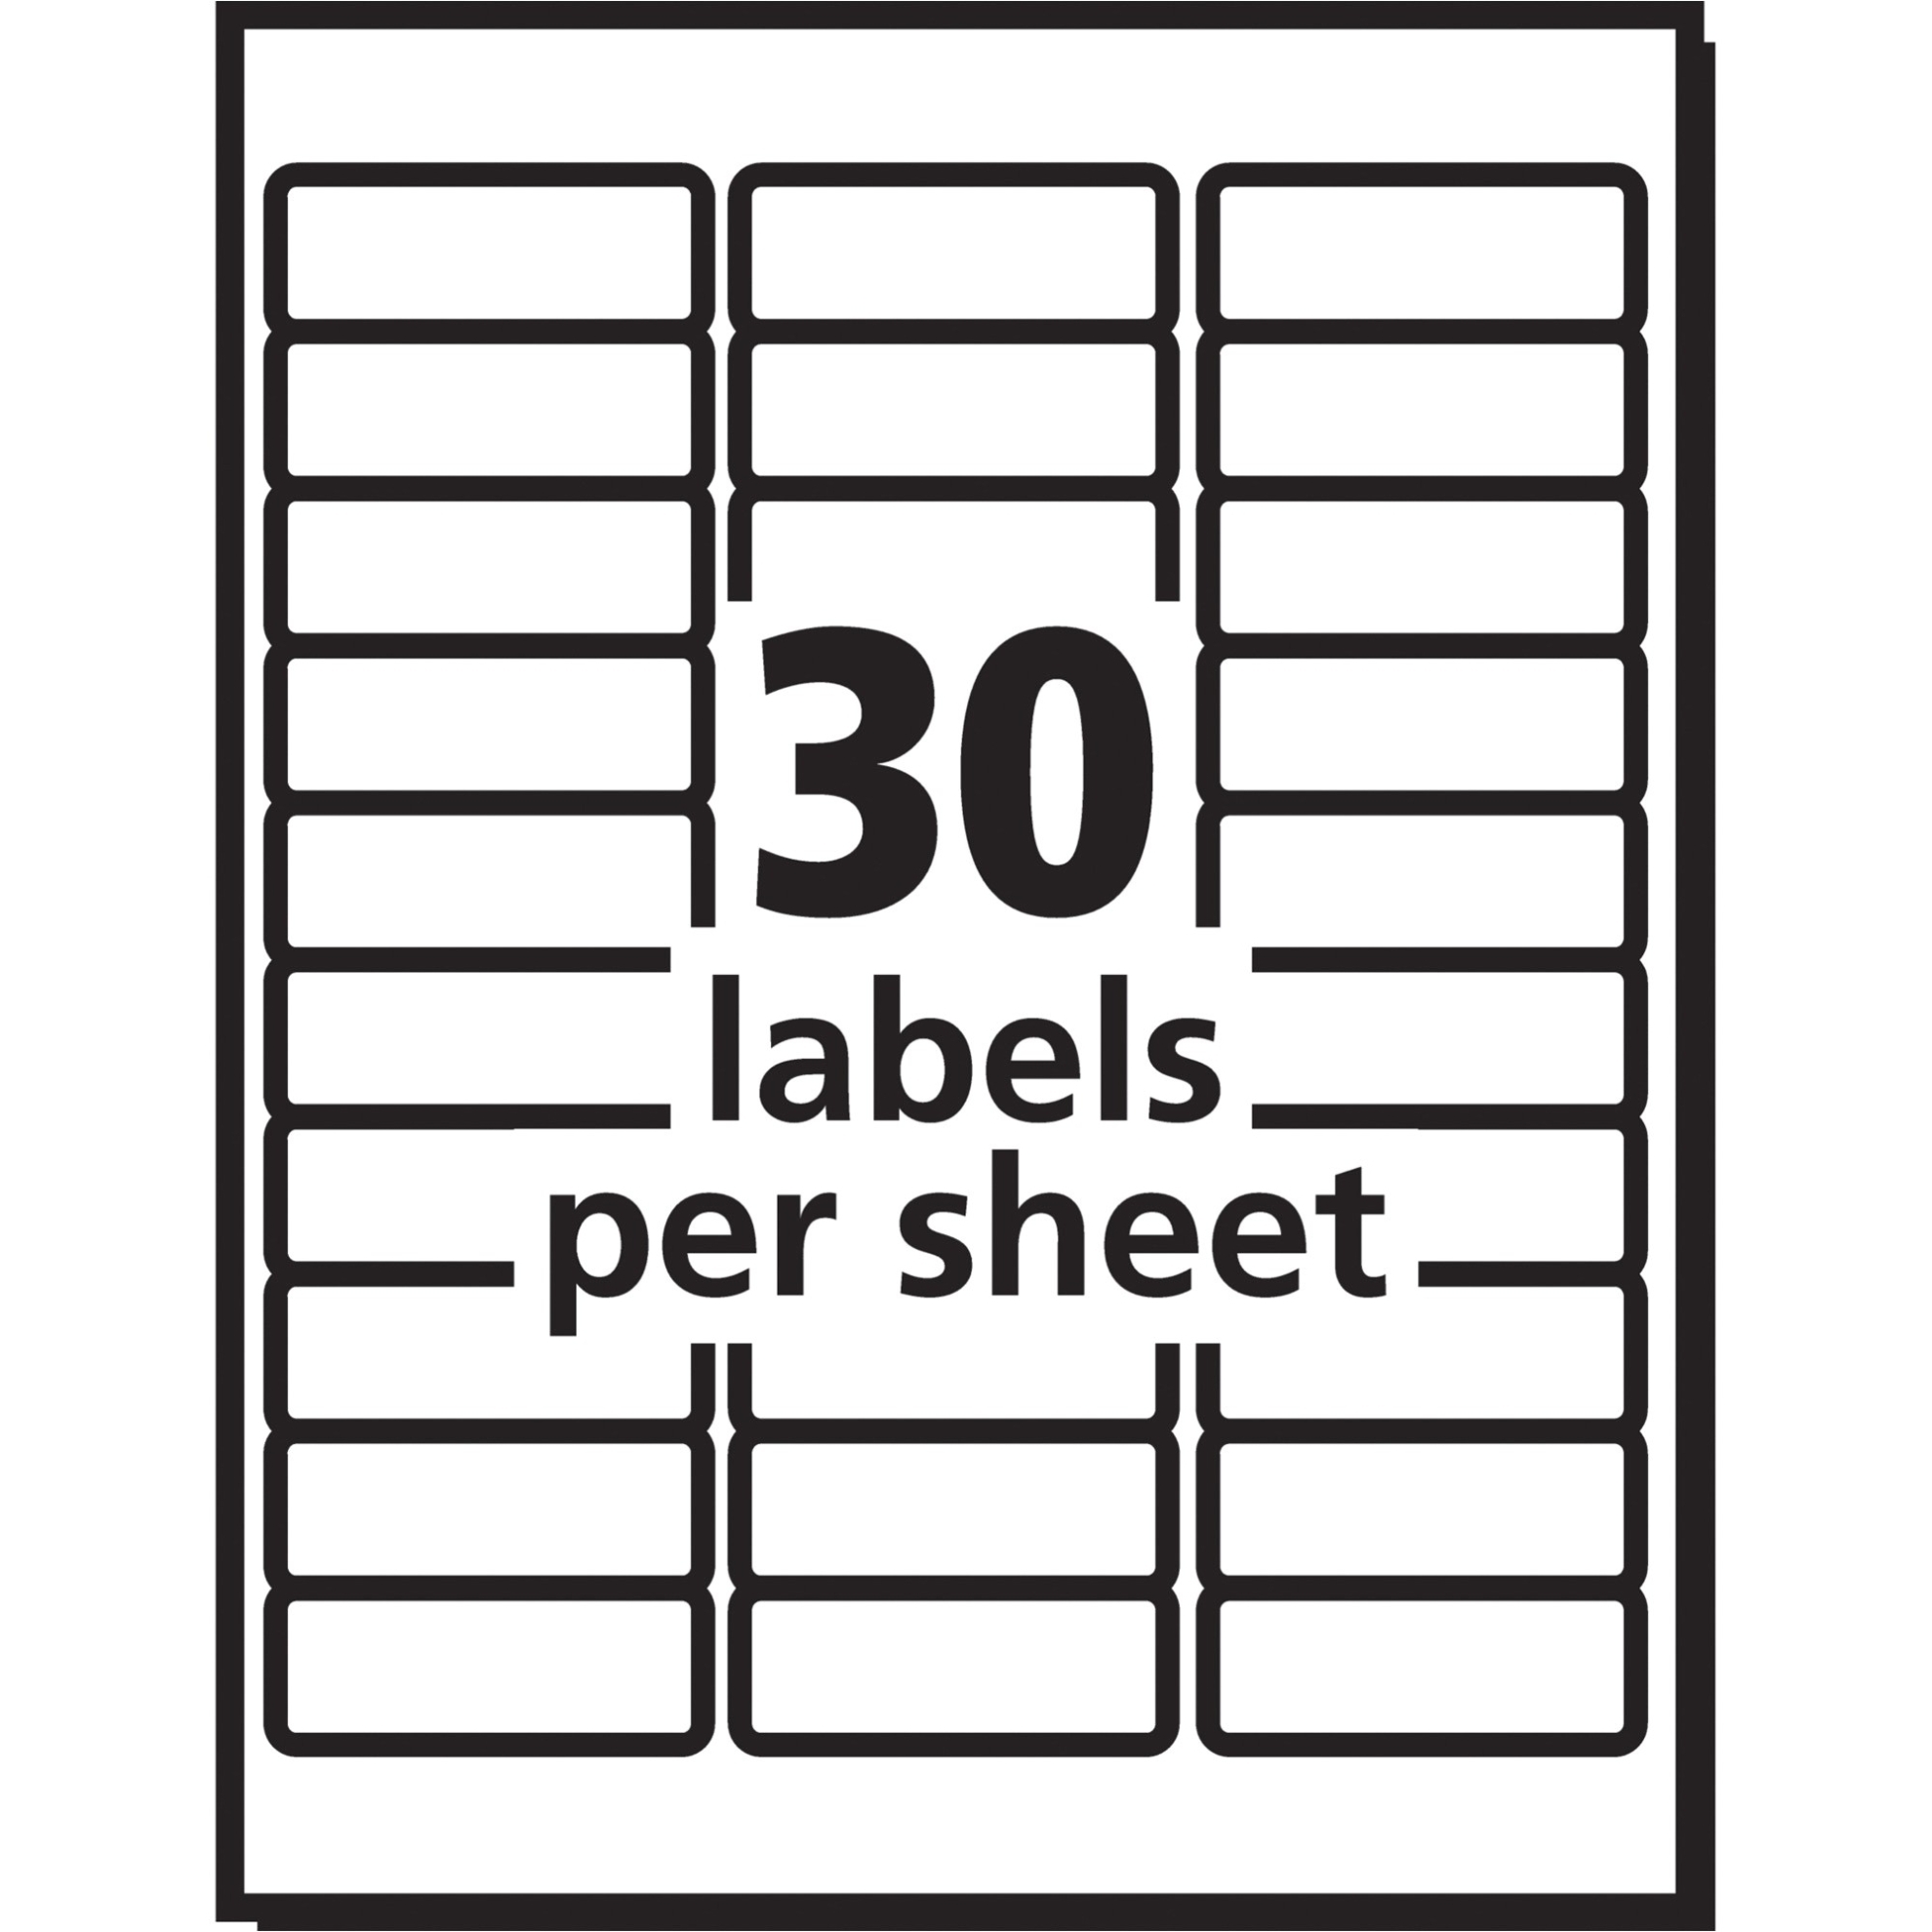 Free Avery Templates 5960 | Williamson Ga Pertaining To Label Maker Template Word